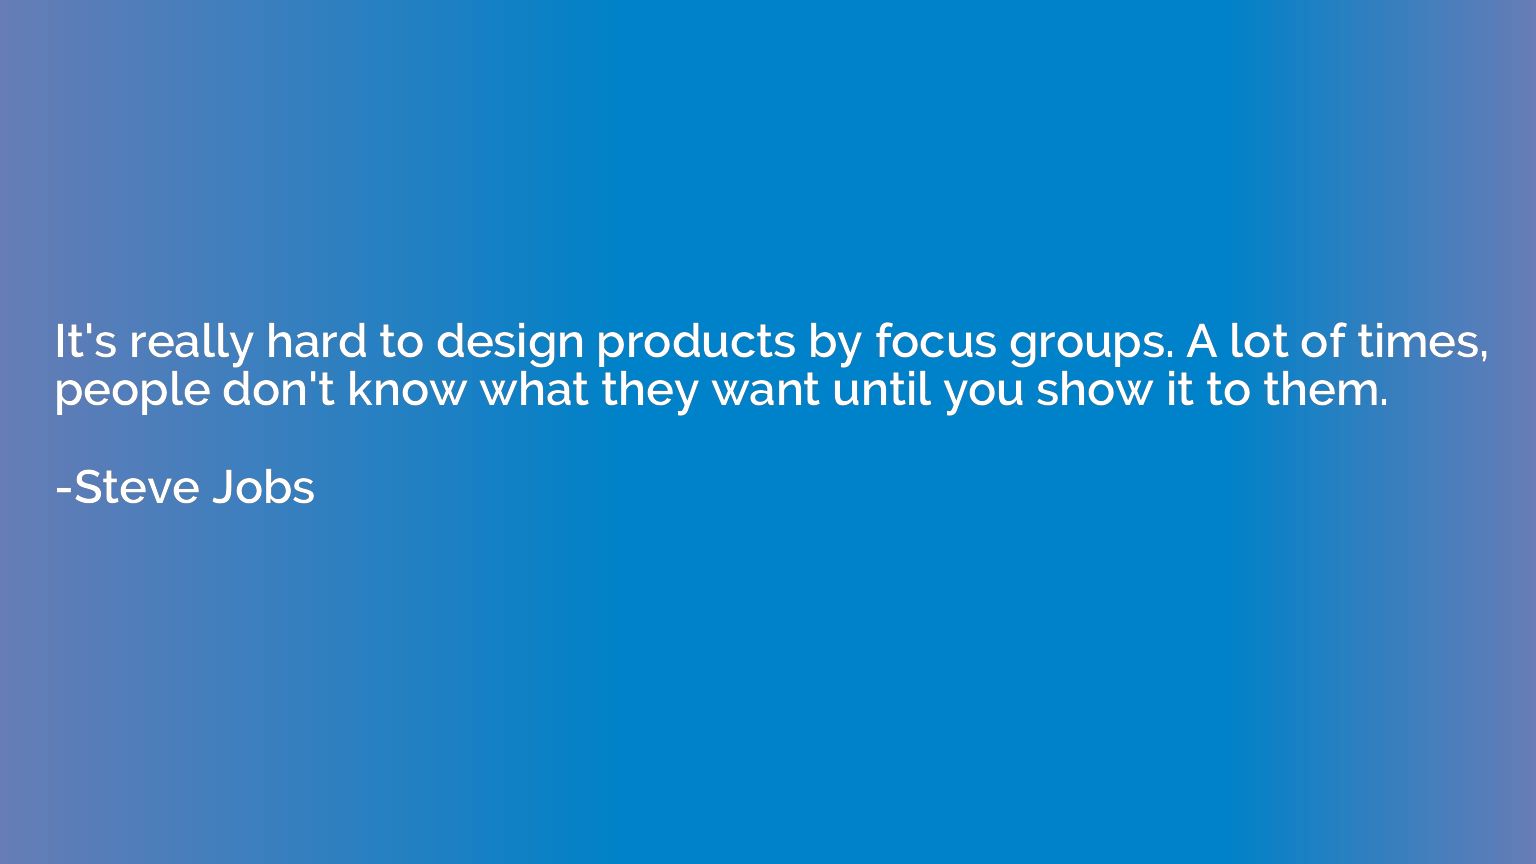 It's really hard to design products by focus groups. A lot o